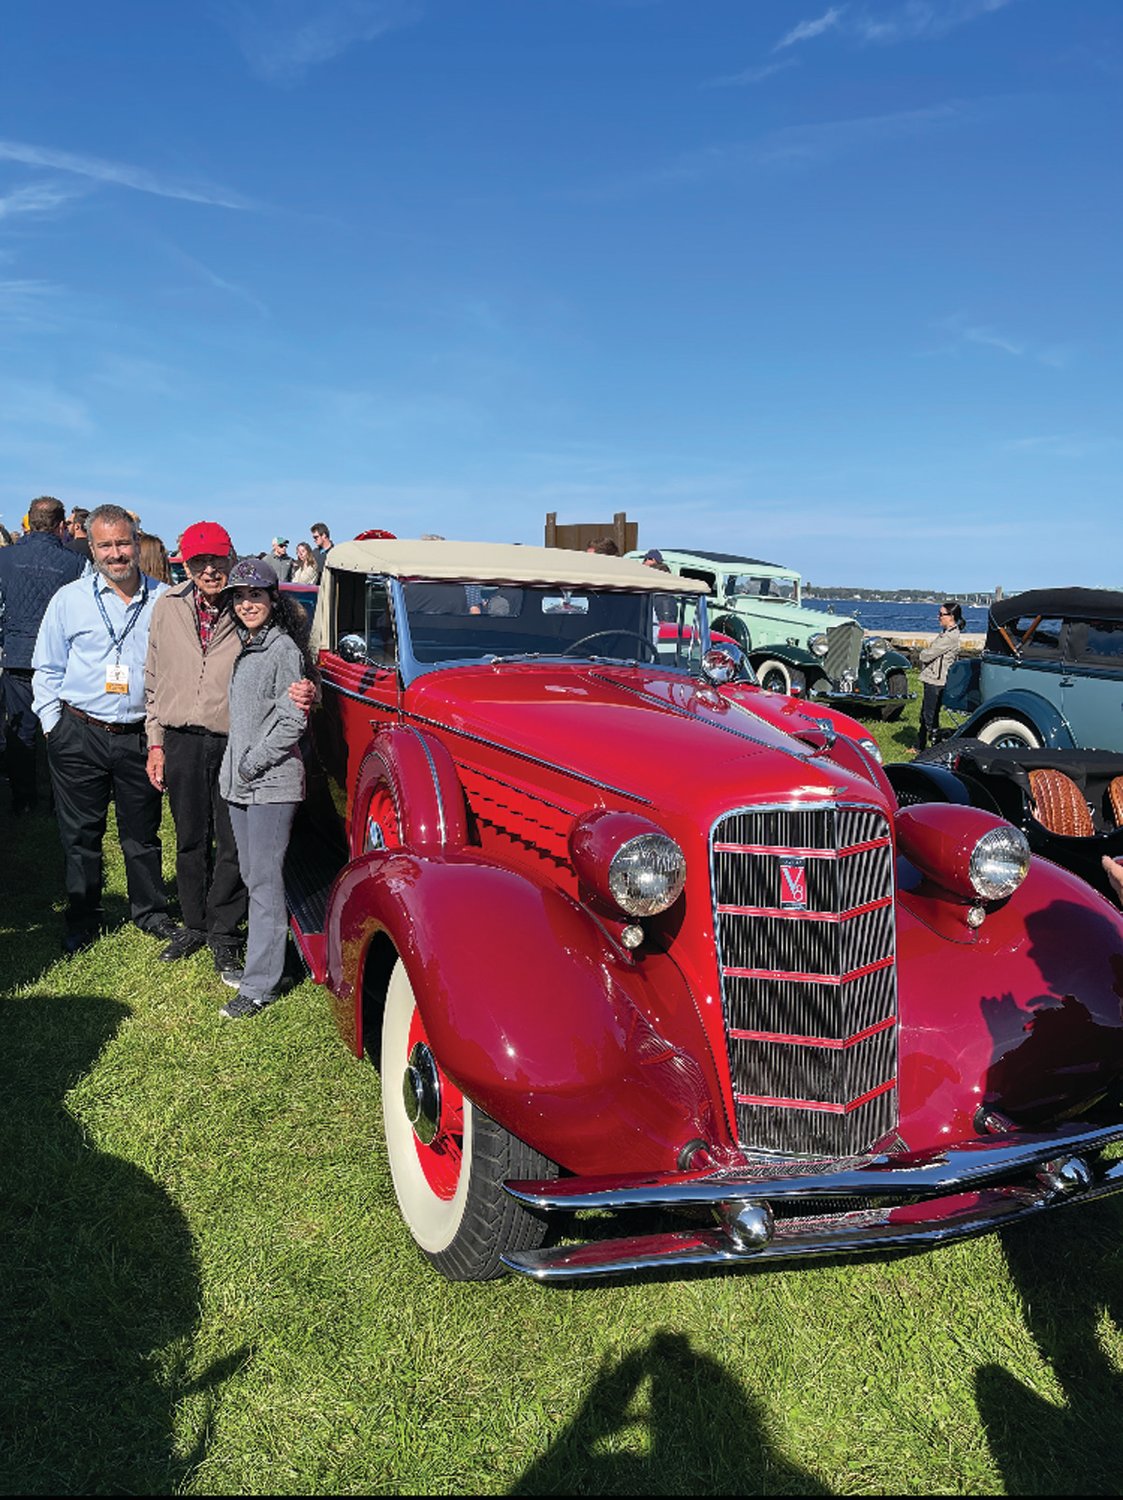 SHOW STOPPER: John Ricci drove his 1934 Cadillac to Fort Adams on Saturday, Oct. 2, where he lined up with other classic automobiles prior to a parade that ended on Bellevue Avenue in Newport.